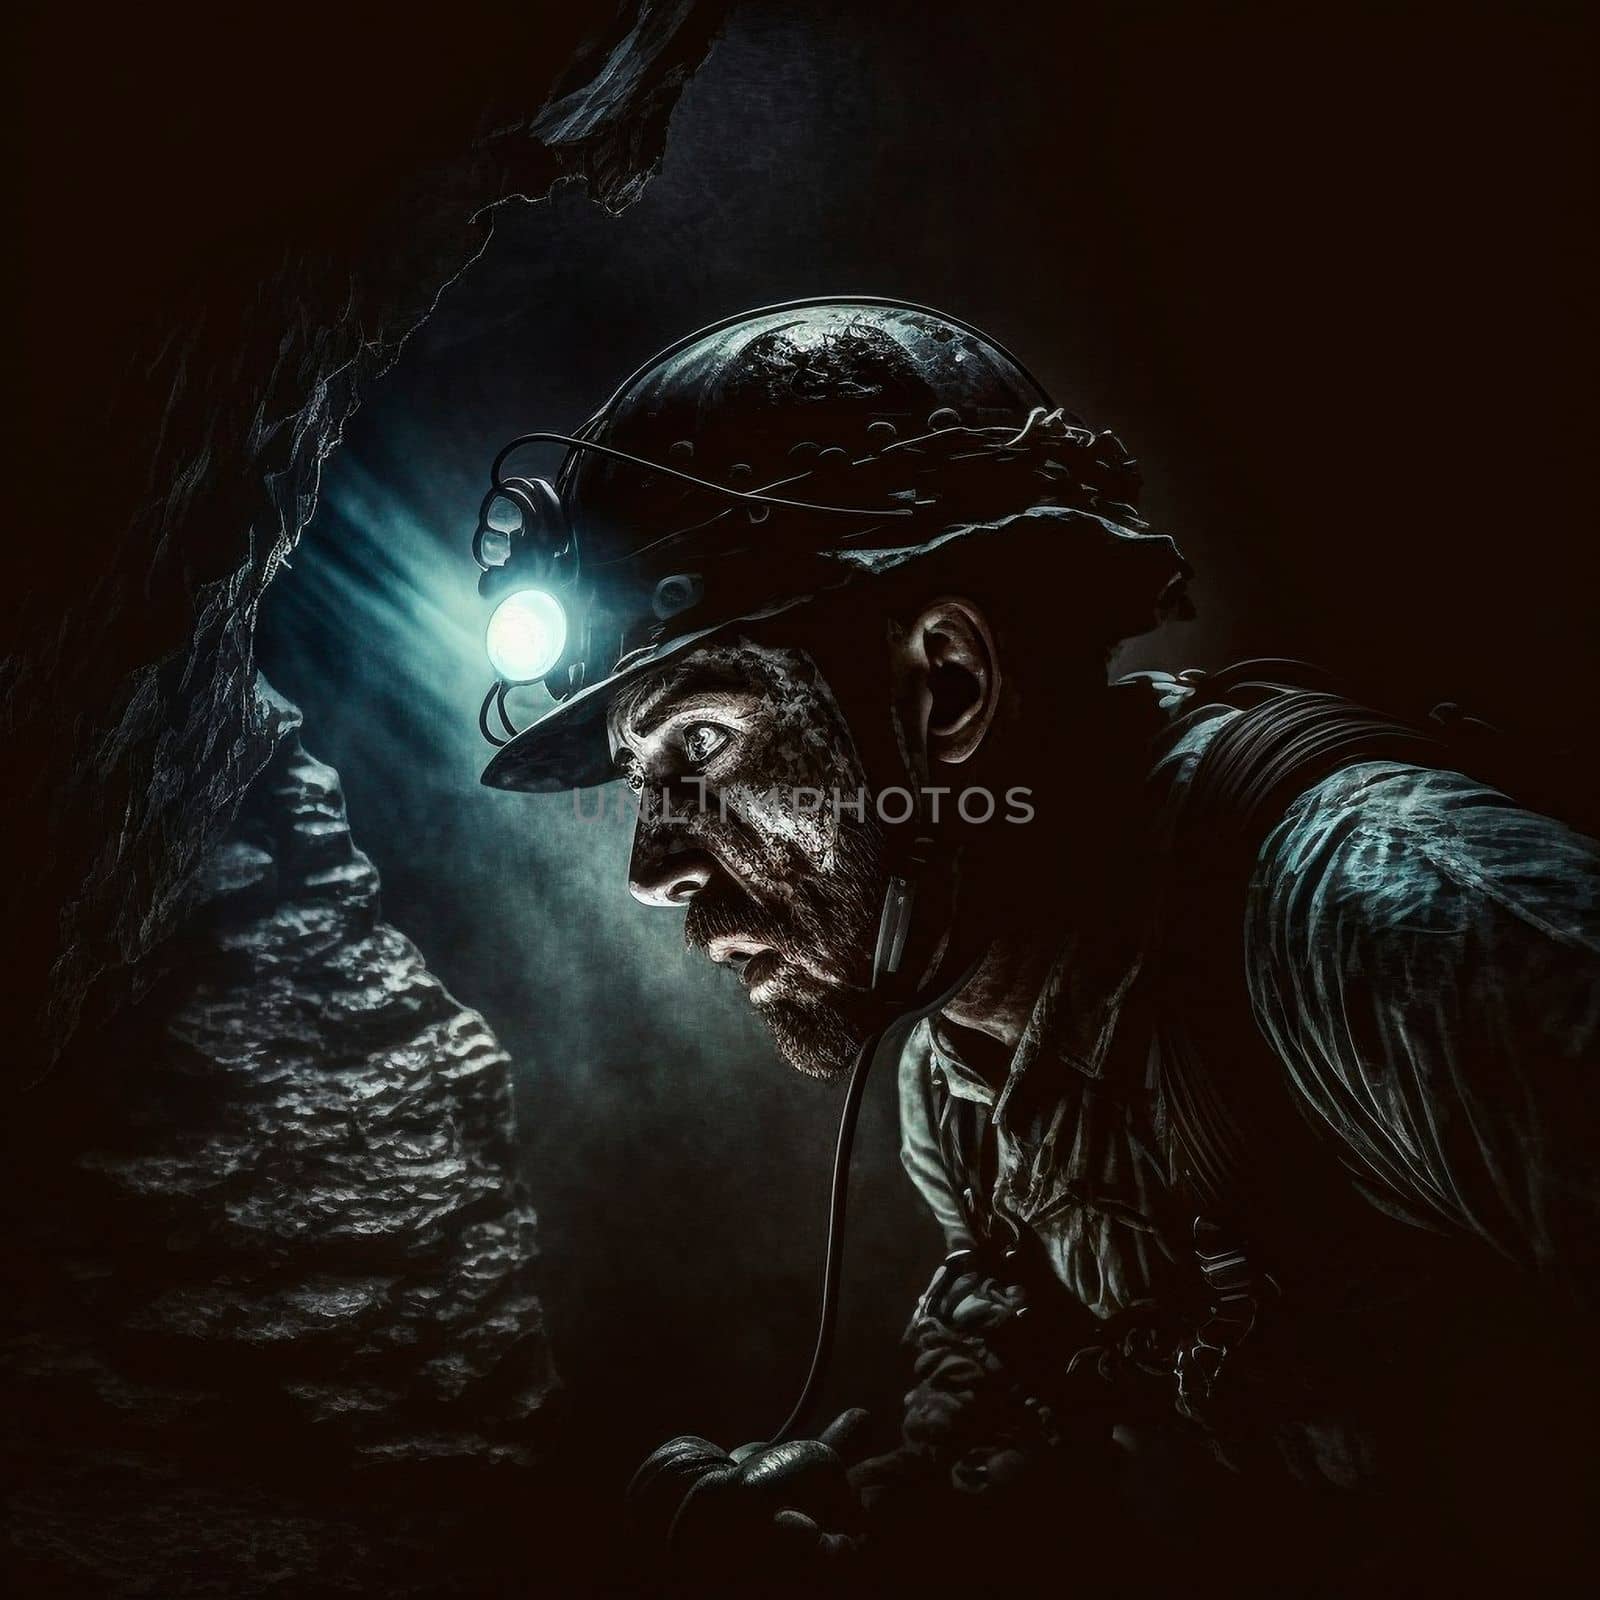 The Man in the Cave. High quality illustration